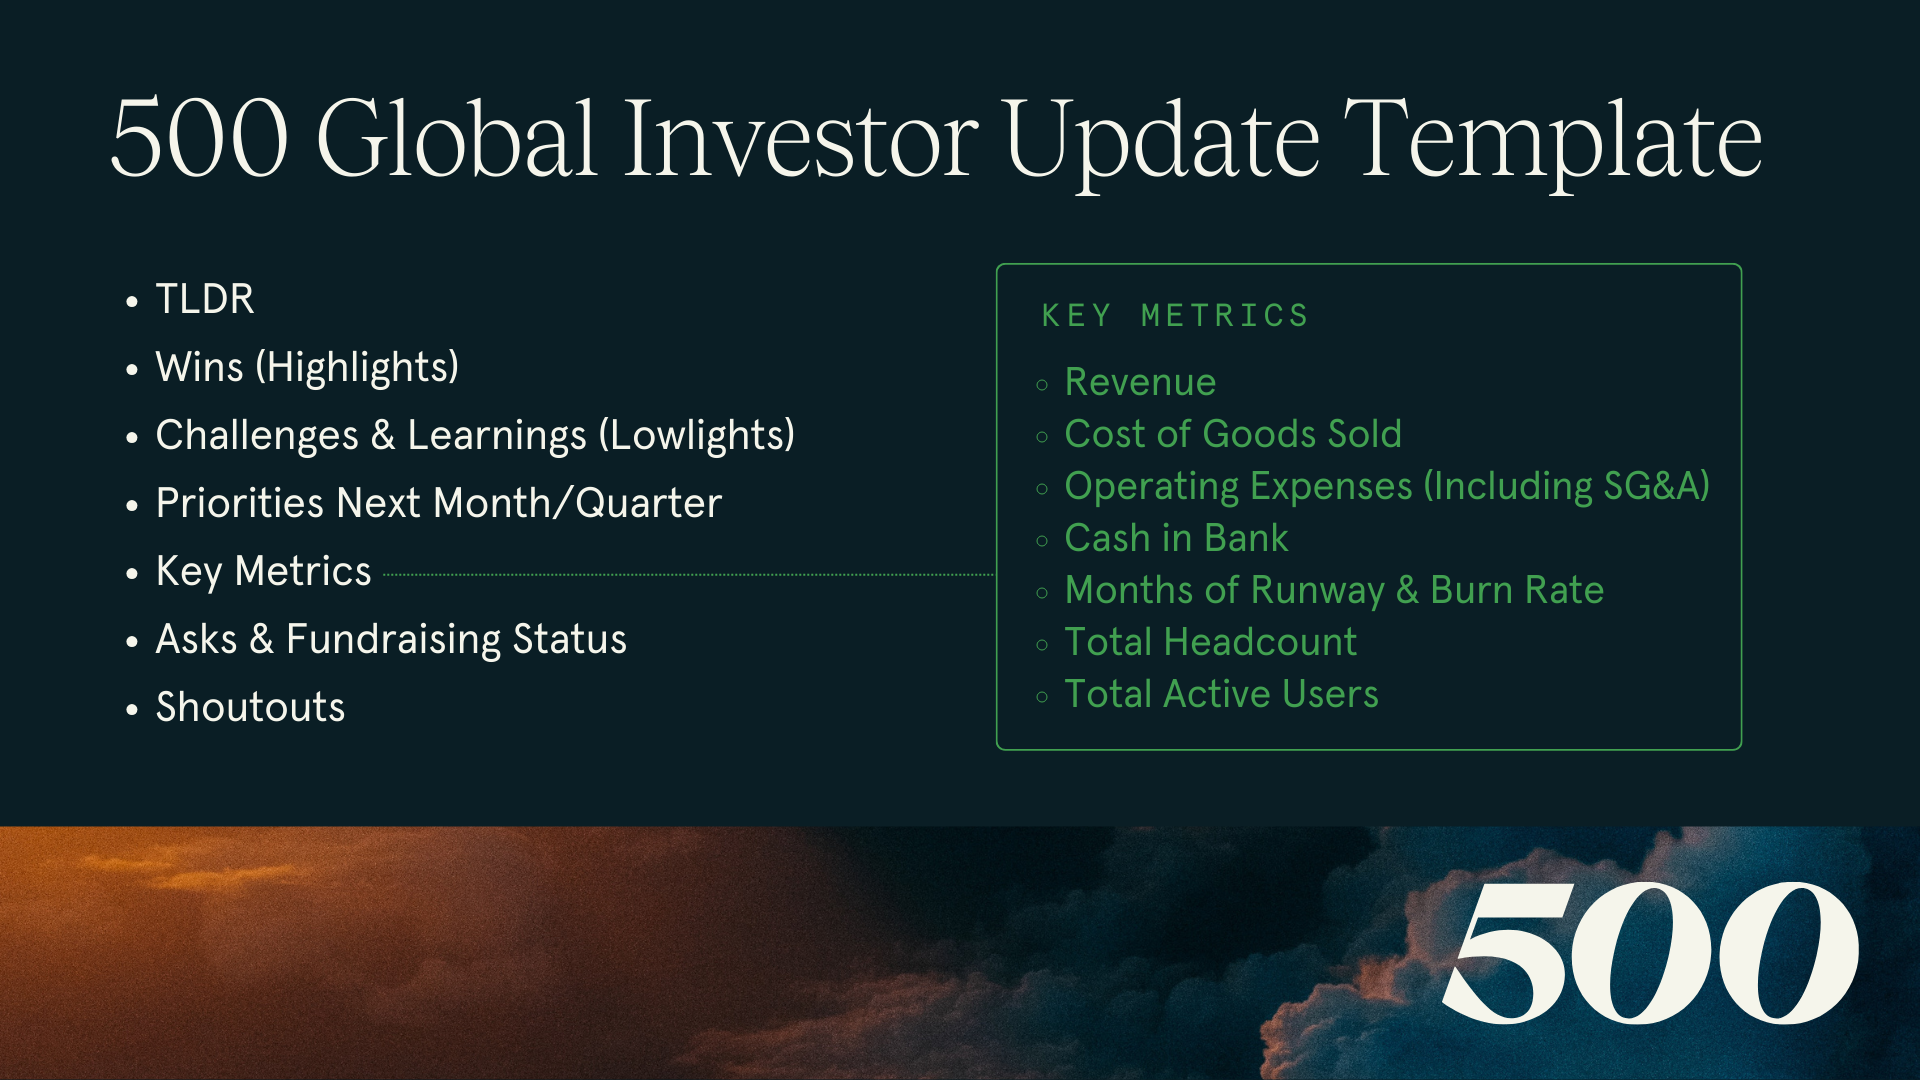 Mastering Investor Updates: A Template for Effective Communication